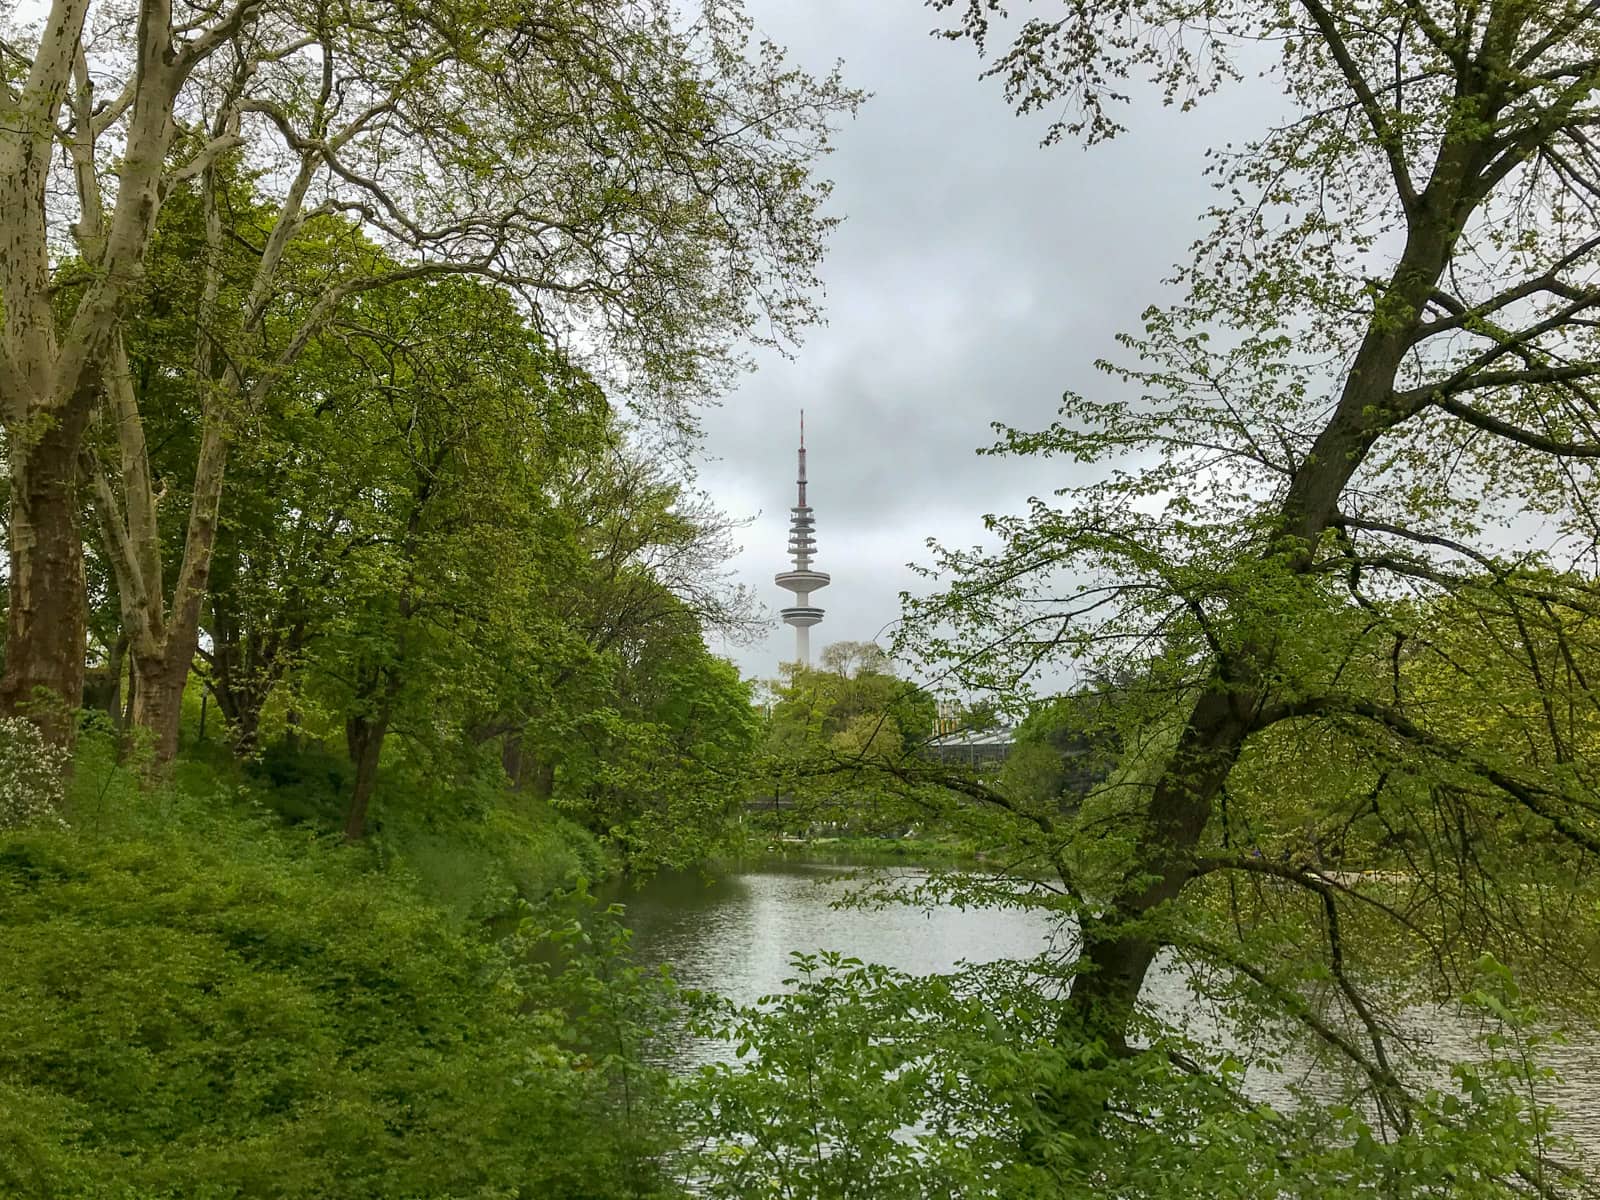 The Hamburg Hertz Tower in Hamburg, Germany. It’s a telecommunications tower as seen from between trees inside of a park. It’s a very cloudy day.